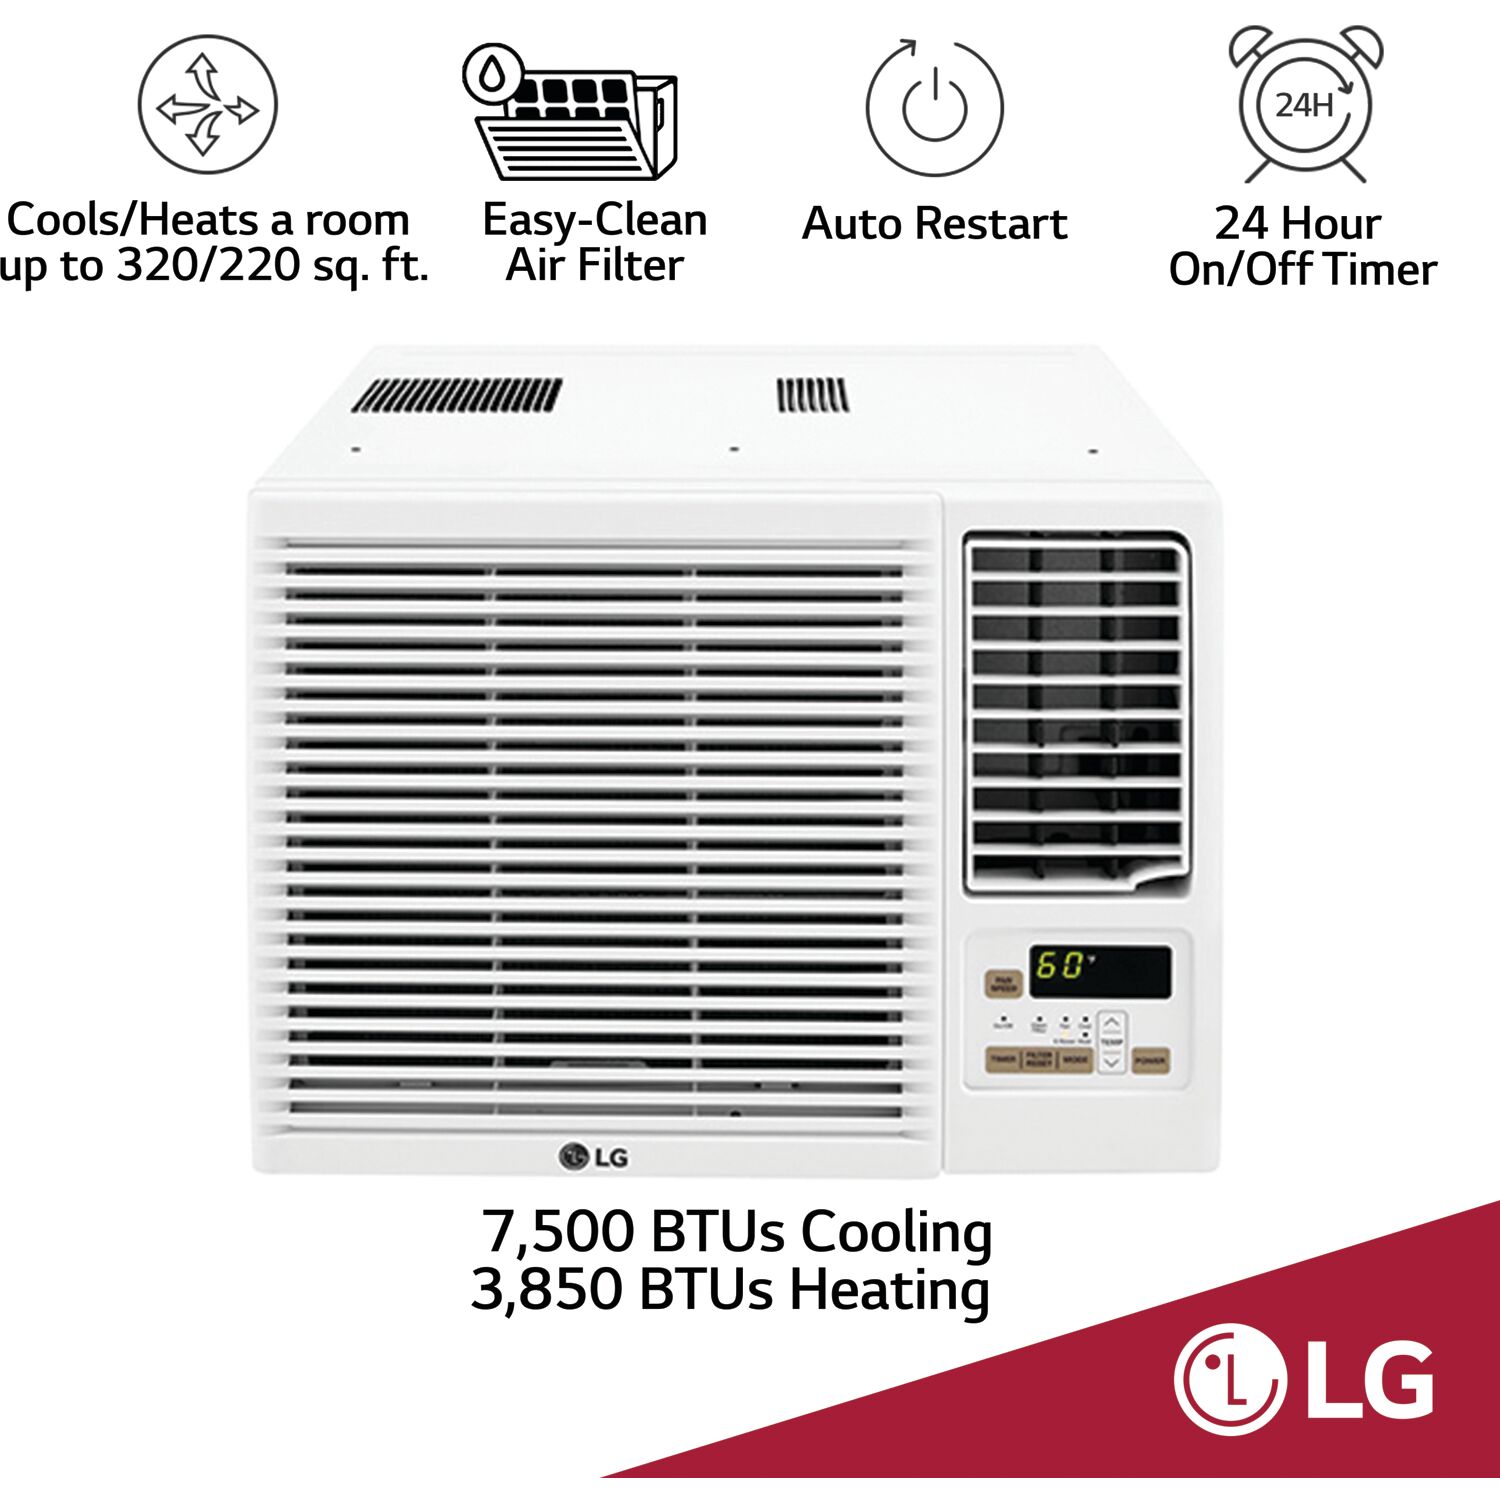 LG 7,500 BTU 115V Window-Mounted Air Conditioner with 3,850 BTU Supplemental Heat Function - image 3 of 11